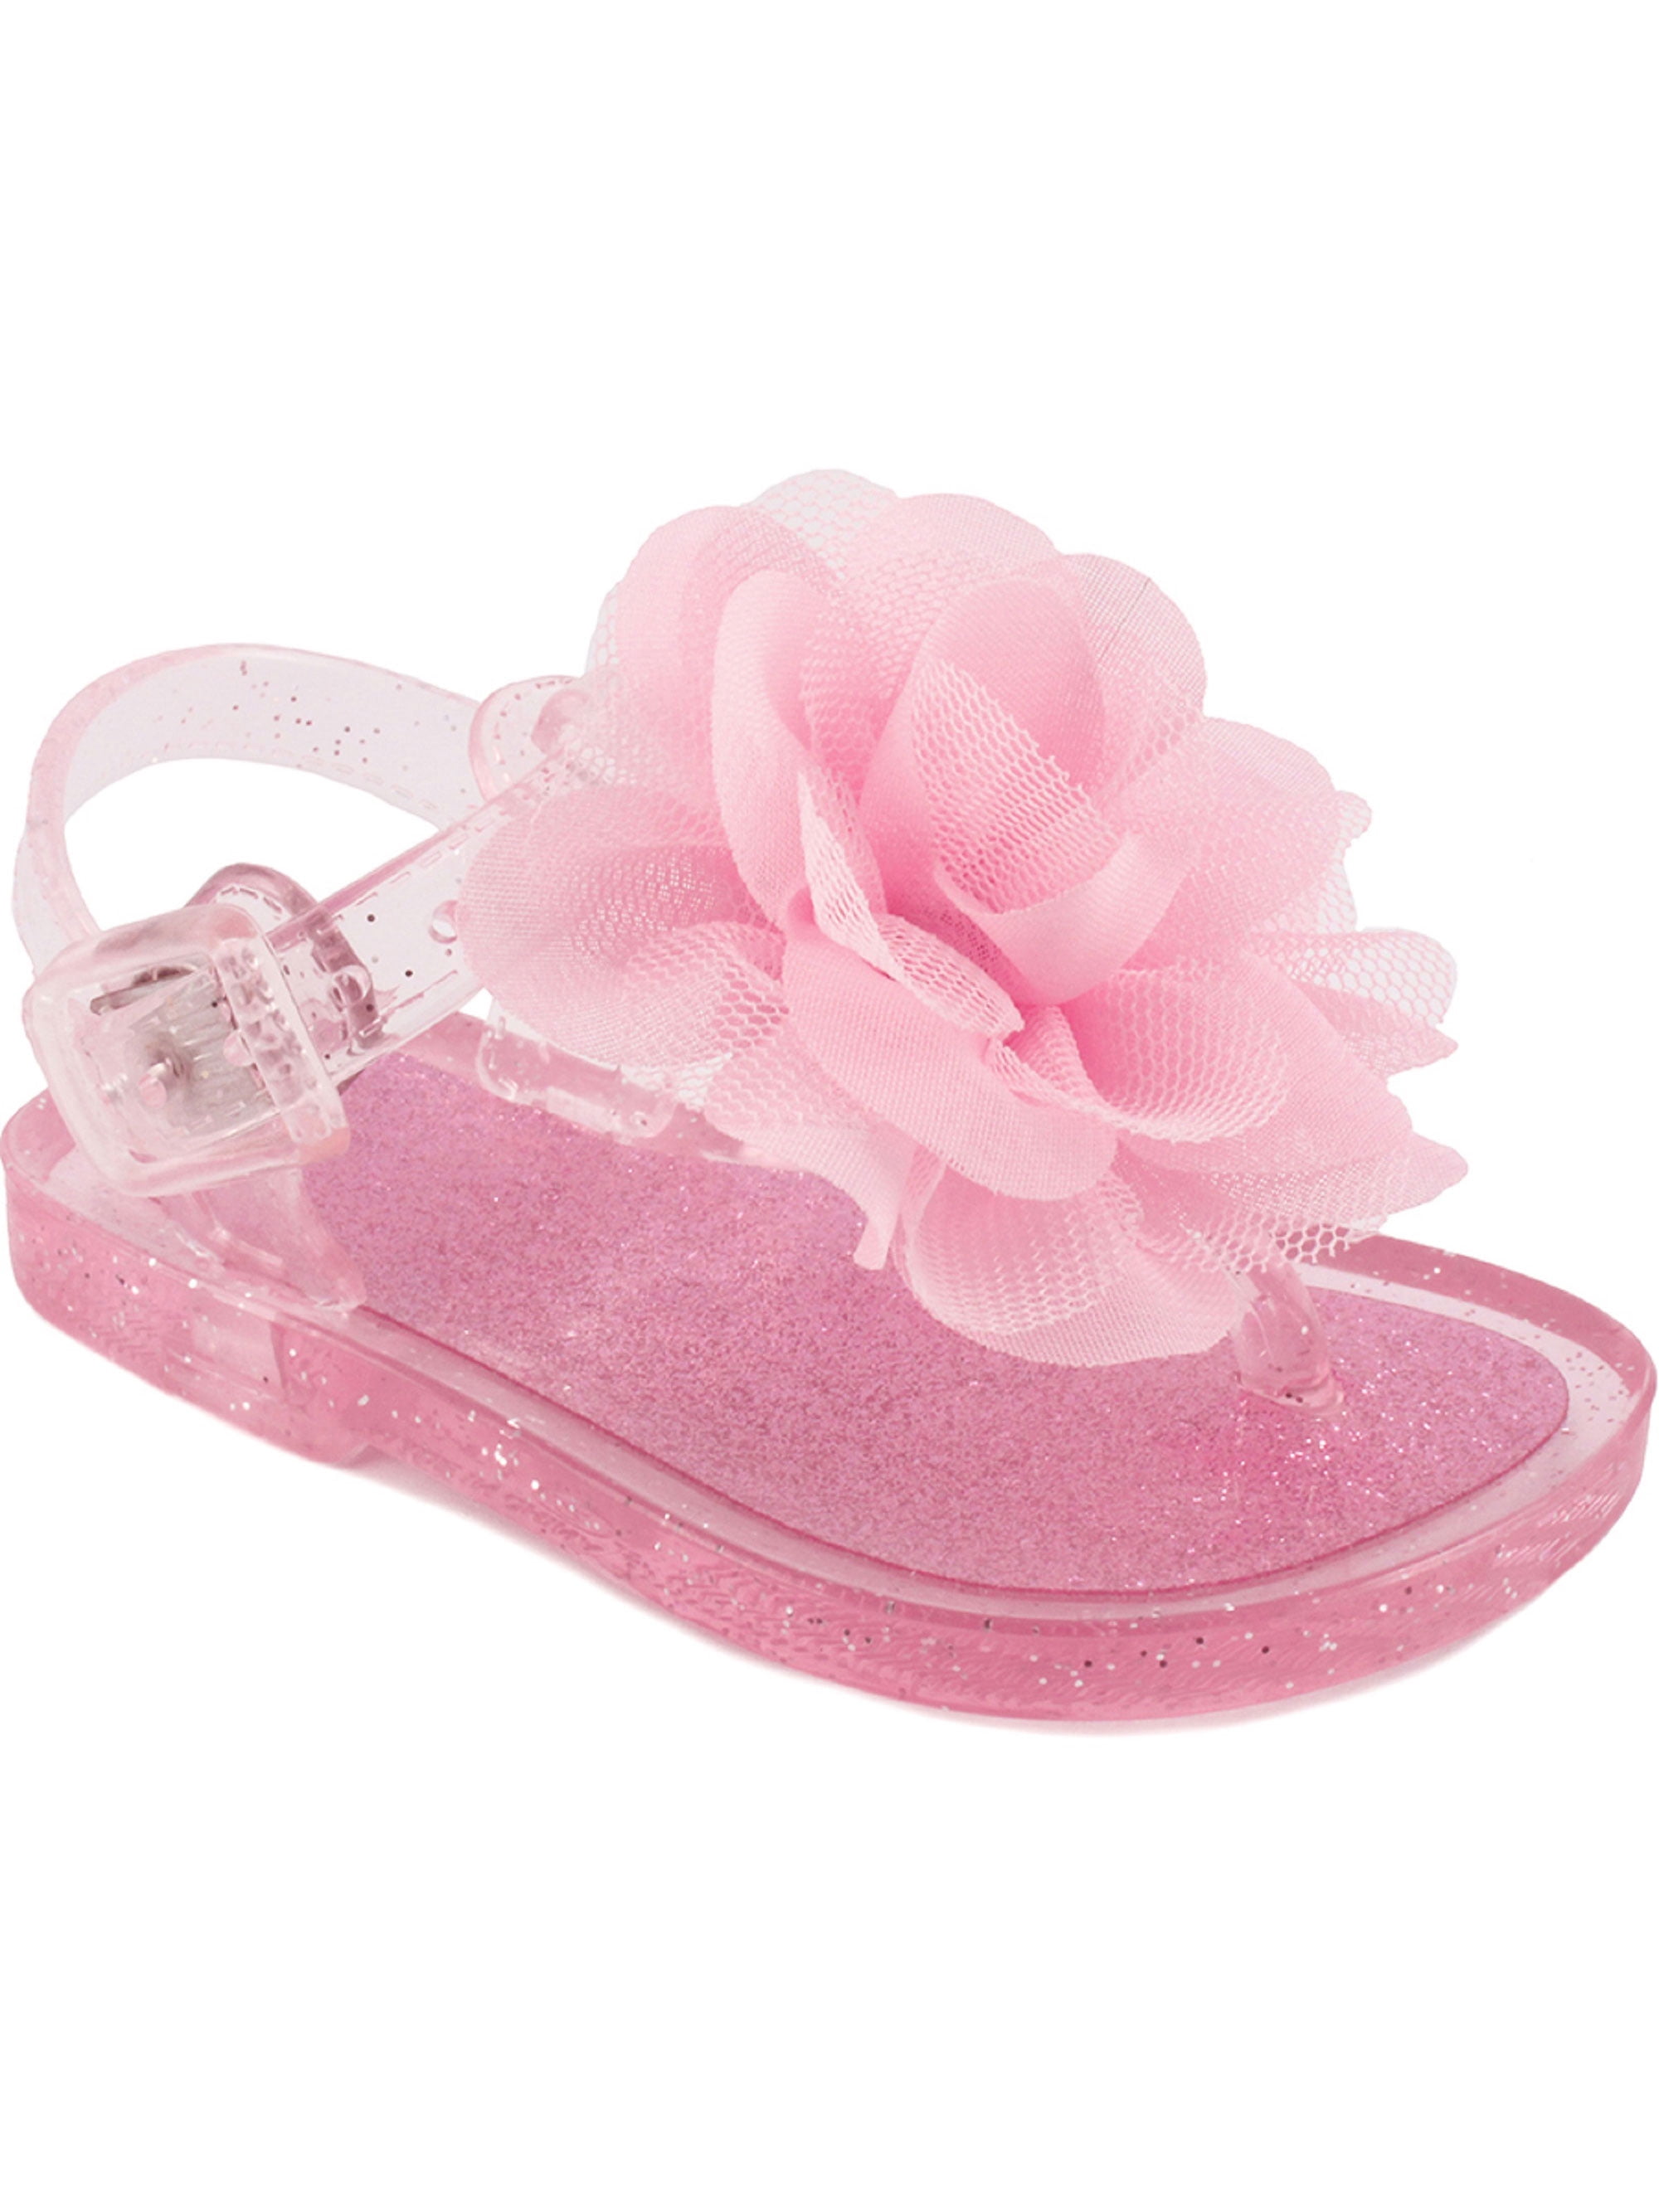 Wee Kids Baby-Girls Sandals Jelly Shoes 